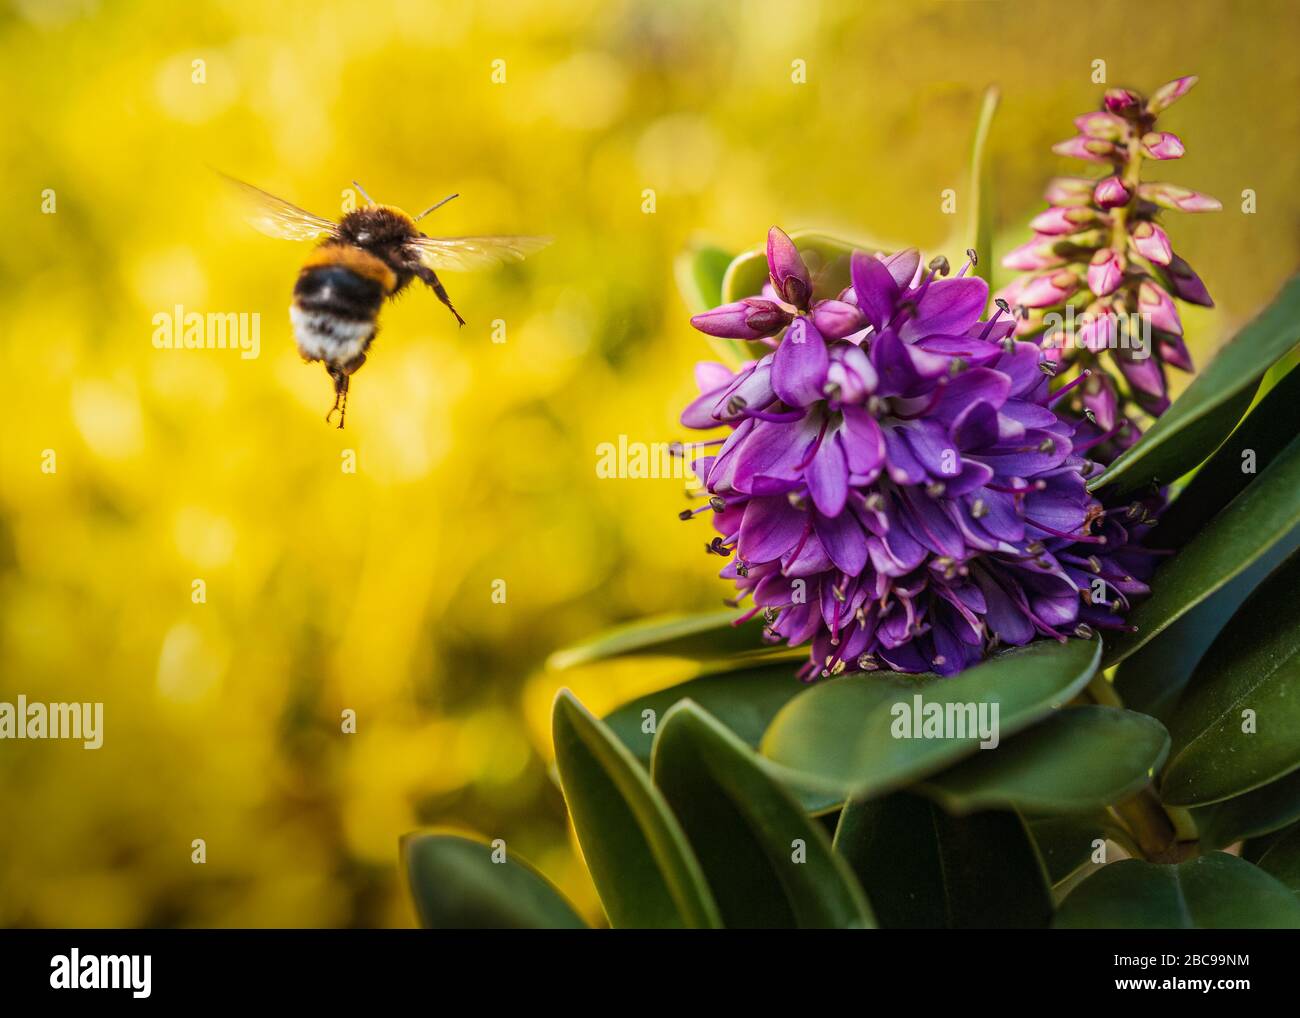 Purple shrub flower attracting a flying bumble bee agains a yellow plant background. There is slight motion blur on the bee. Stock Photo